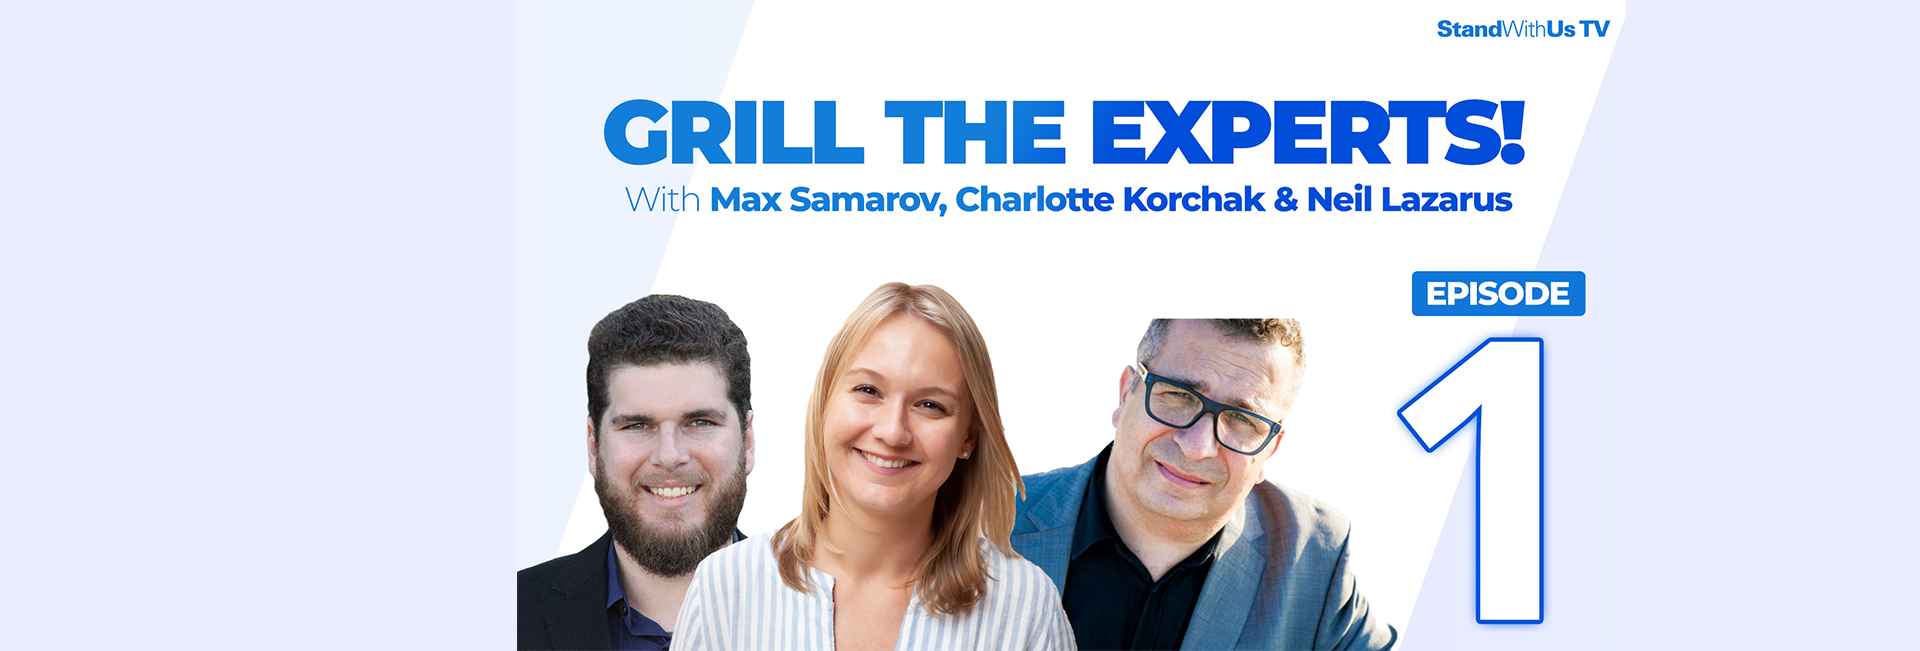 Grill The Experts | Episode 1